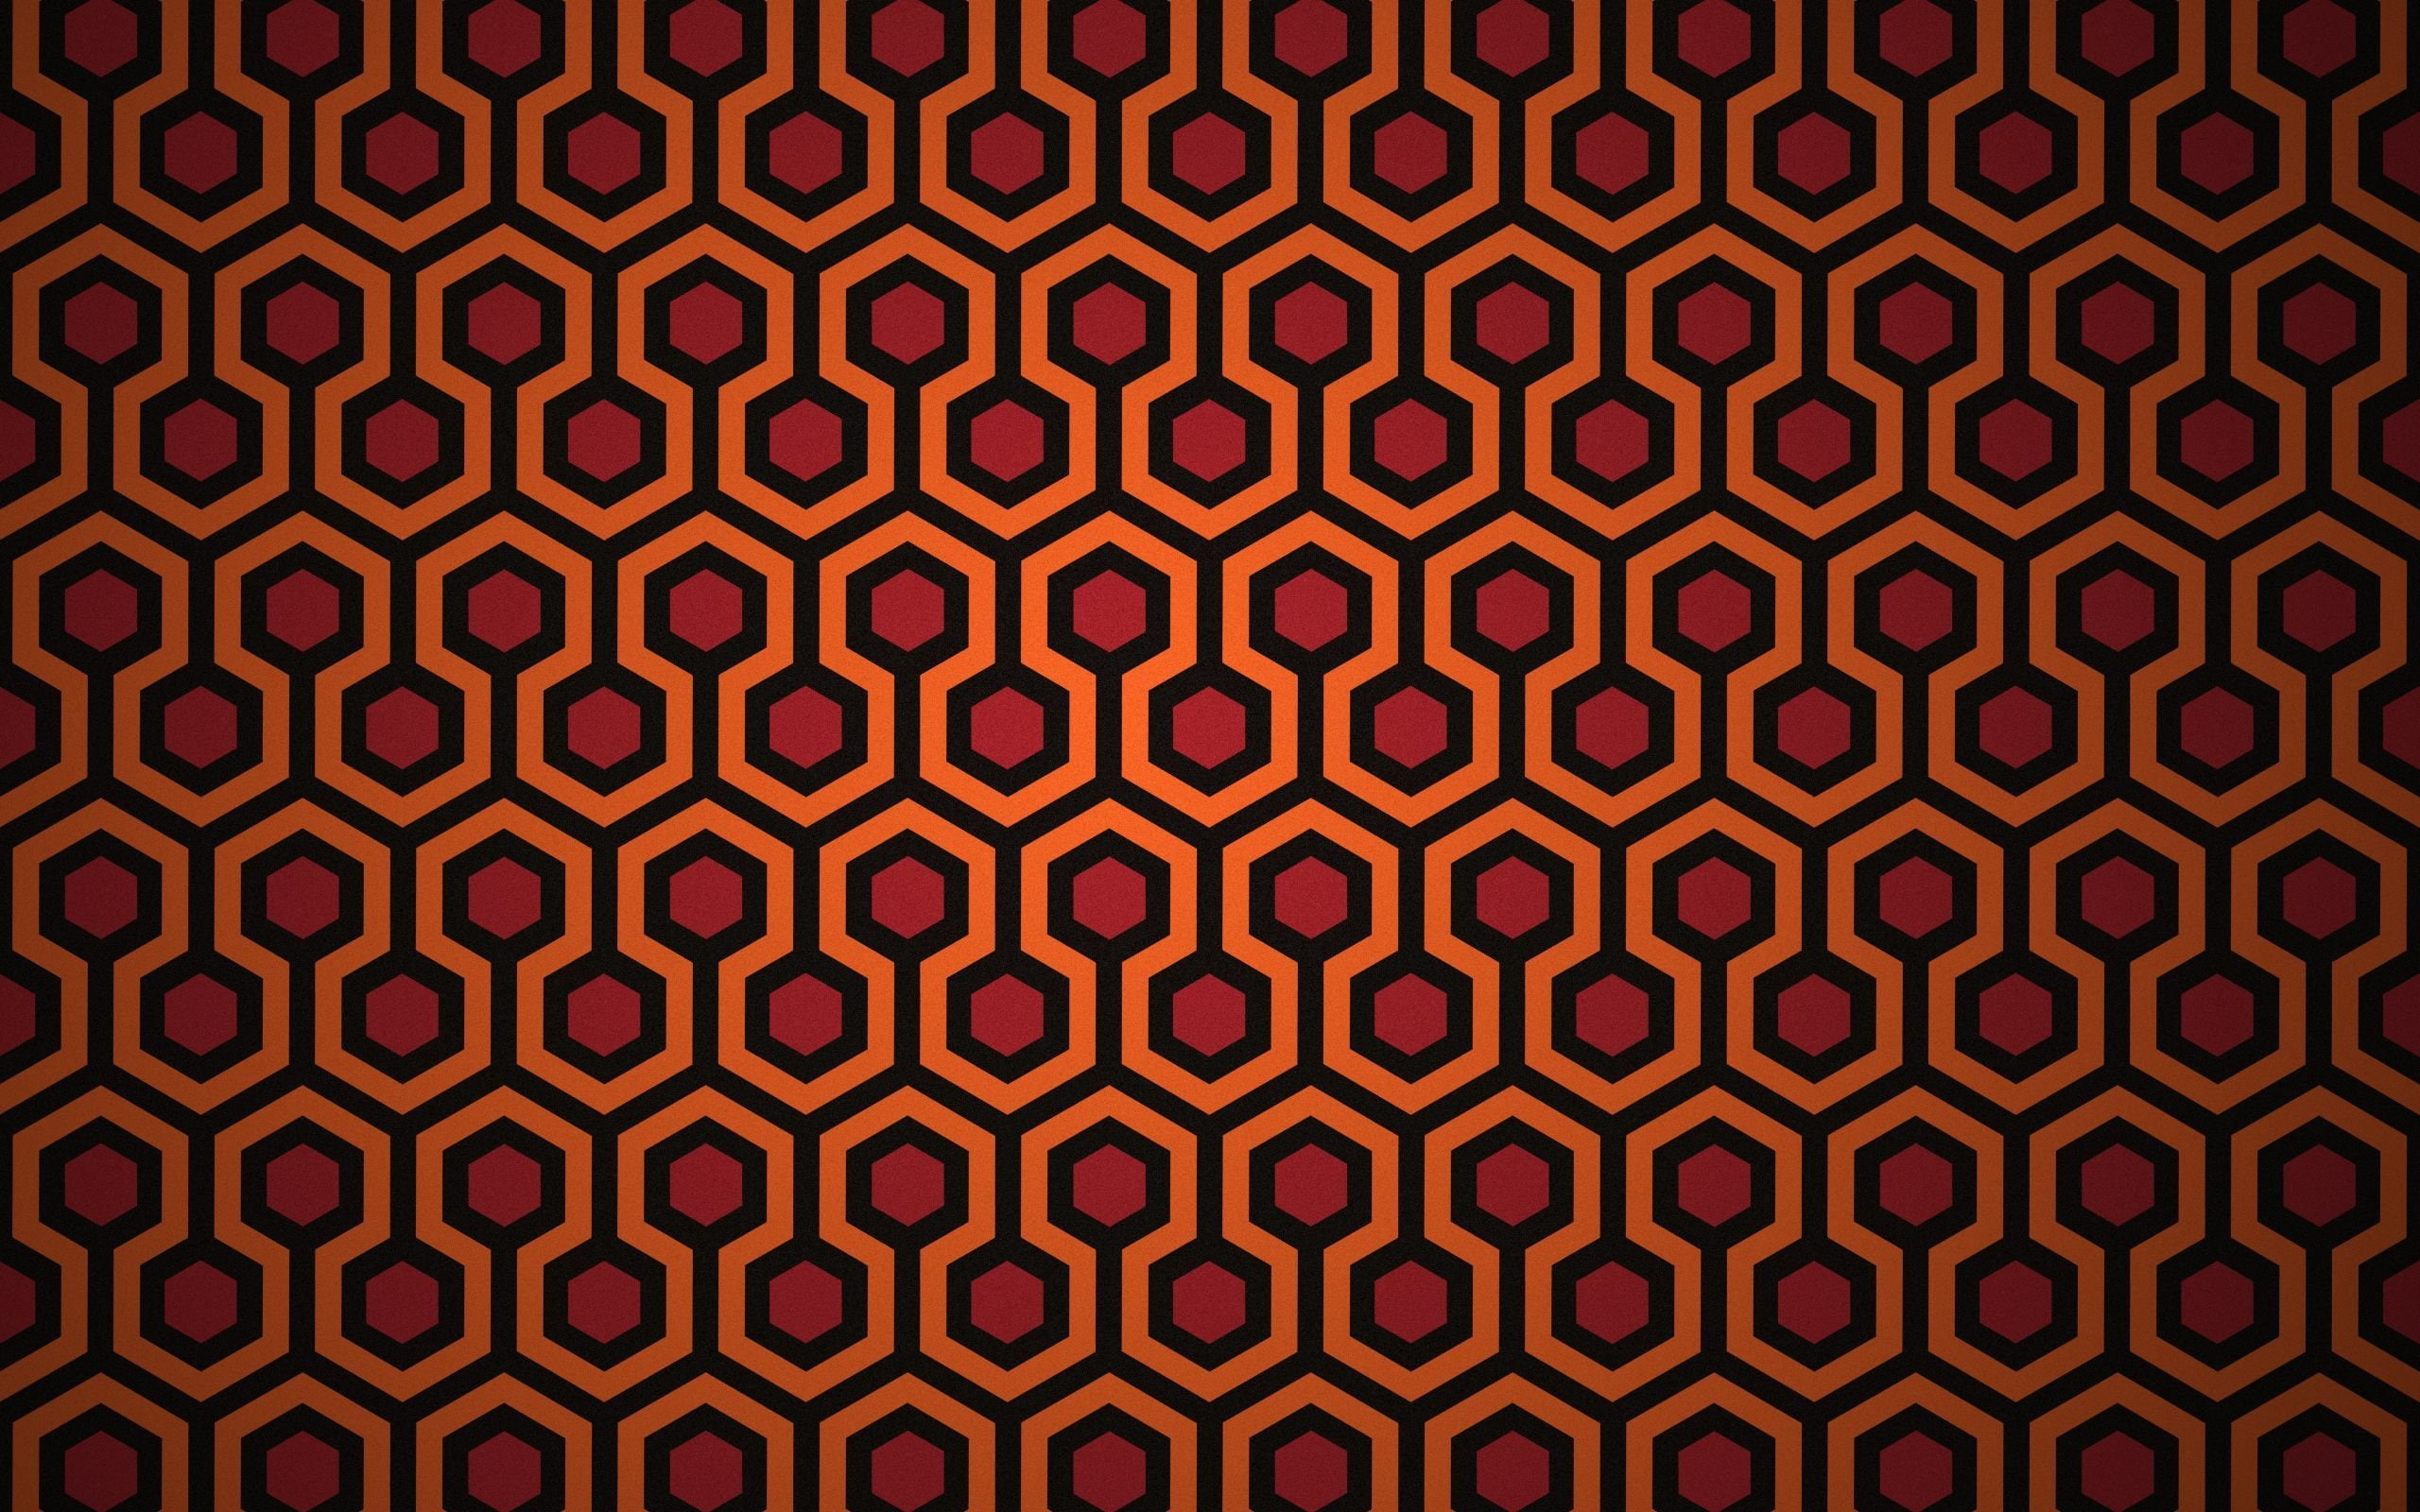 pattern, abstract, hexagon, The Shining, Stanley Kubrick, full frame